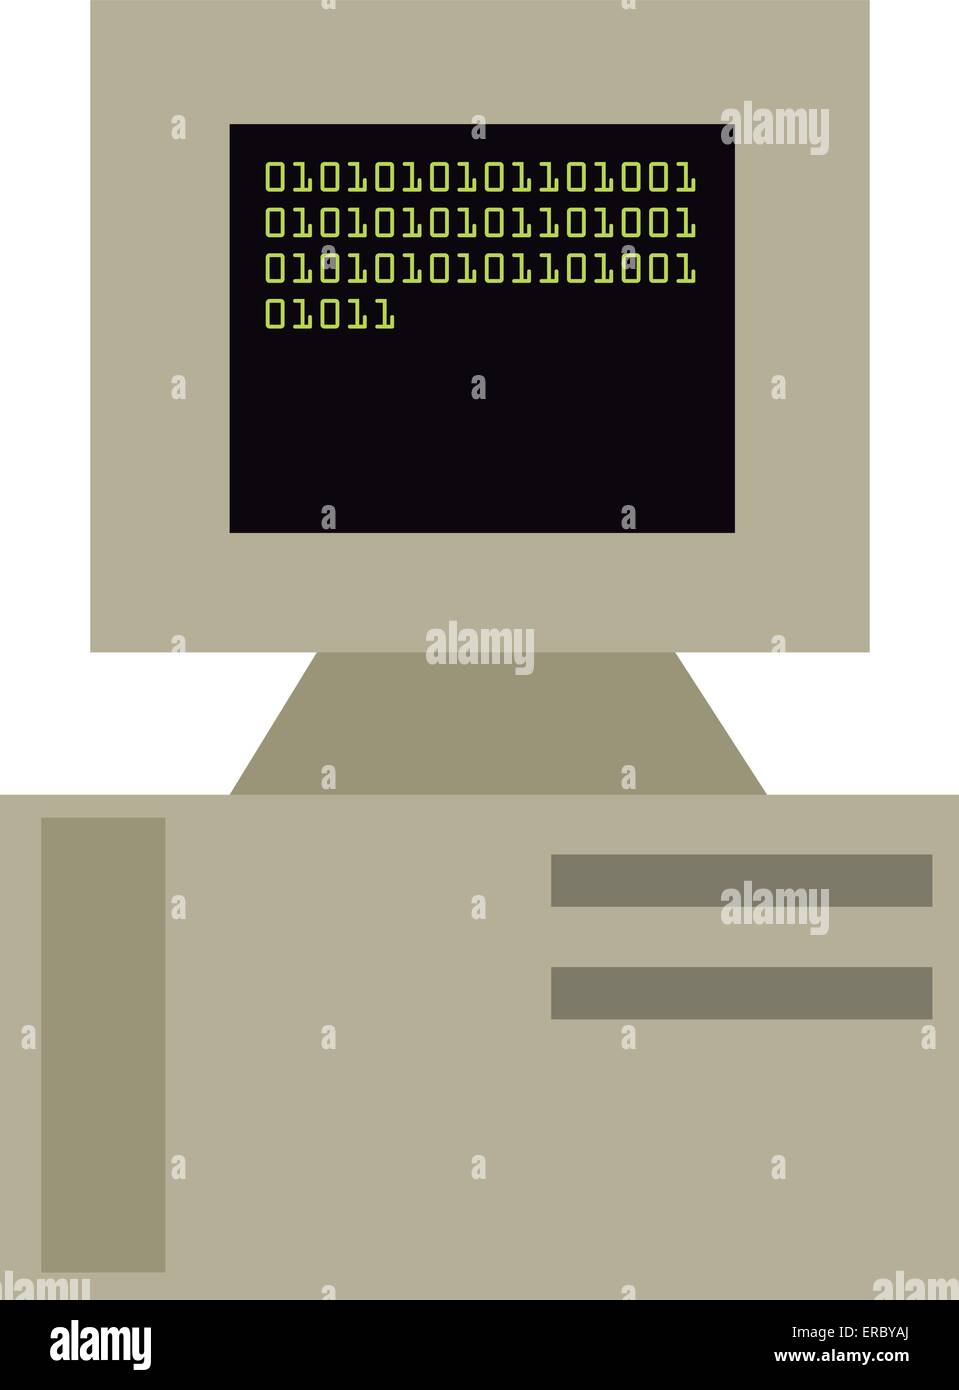 Vector illustration of a vintage personal computer with binary code on screen. Isolated over white background. Stock Vector